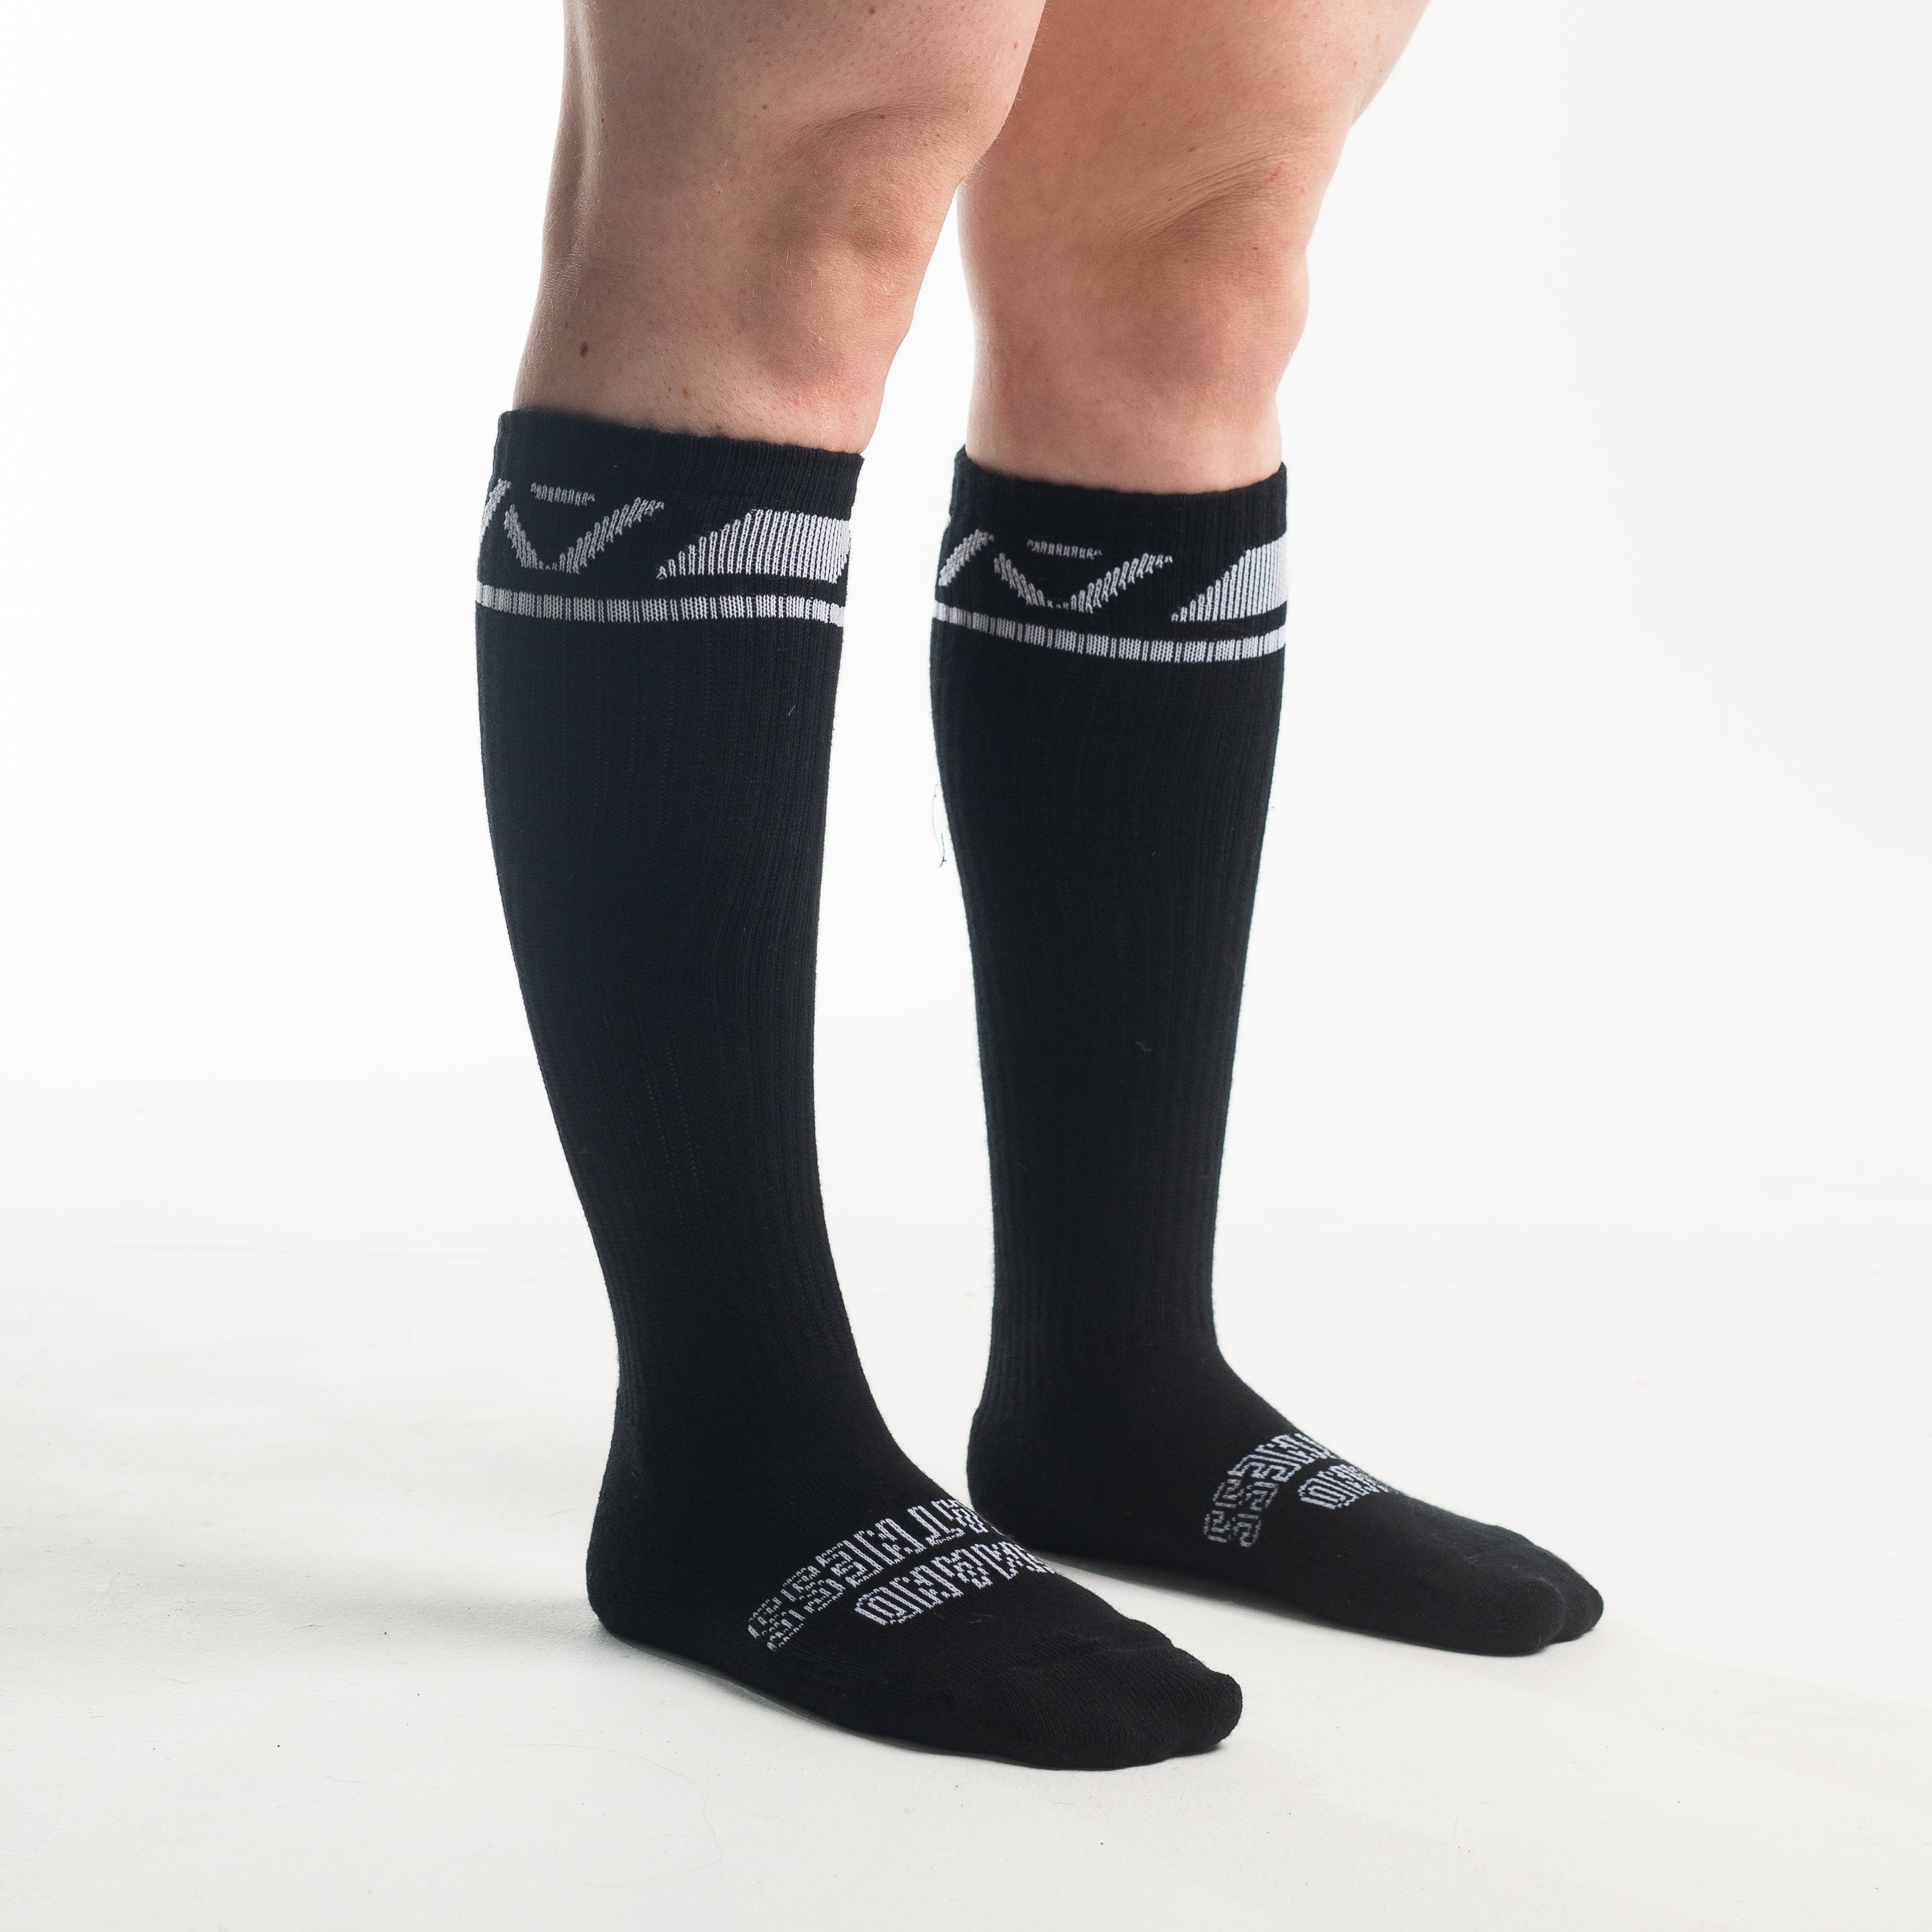 A7 Domino Deadlift socks are designed specifically for pulls and keep your shins protected from scrapes. A7 deadlift socks are a perfect pair to wear in training or powerlifting competition. The IPF Approved Kit includes Powerlifting Singlet, A7 Meet Shirt, A7 Zebra Wrist Wraps, A7 Deadlift Socks, Hourglass Knee Sleeves (Stiff Knee Sleeves and Rigor Mortis Knee Sleeves). Genouillères powerlifting shipping to France, Spain, Ireland, Germany, Italy, Sweden and EU.